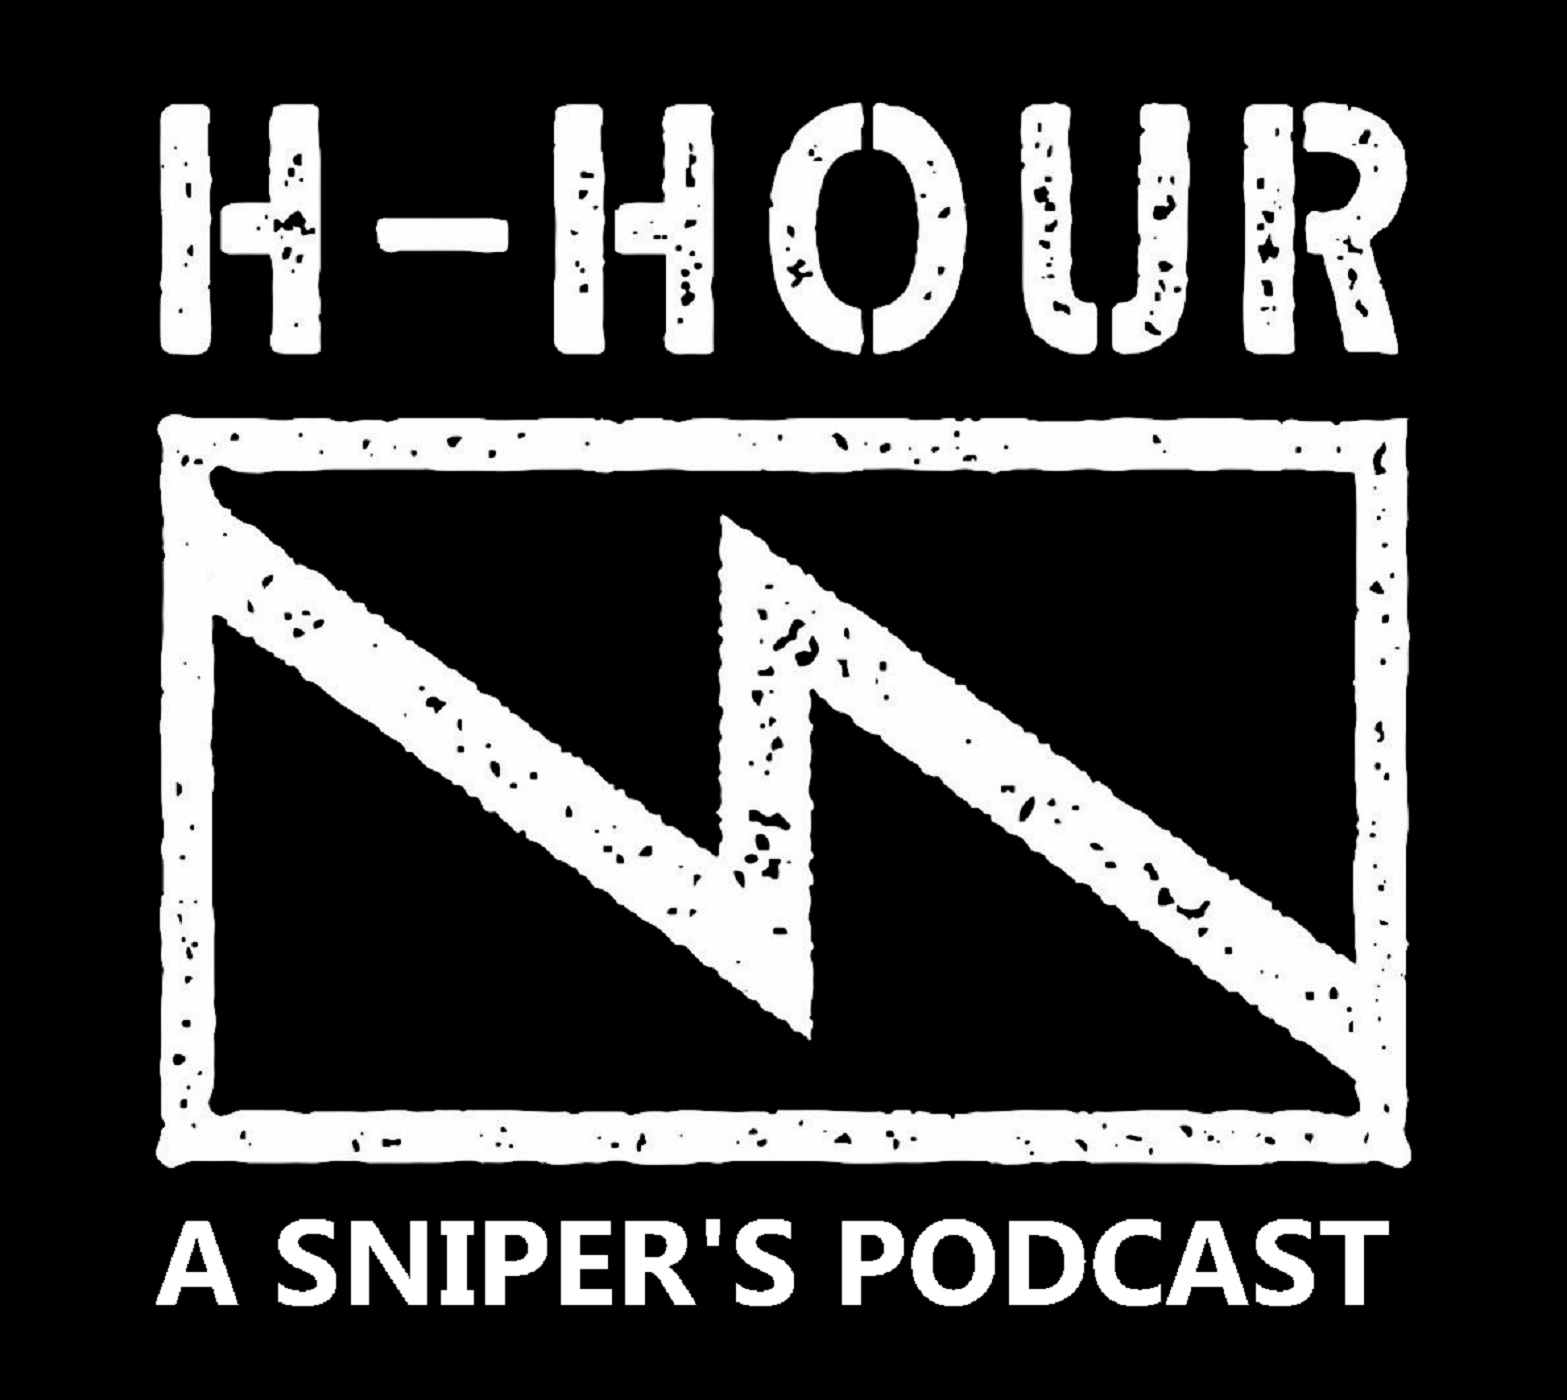 A highlight from H-Hour Podcast #146 Ash Winter  author, podcaster, former cavalry QRH